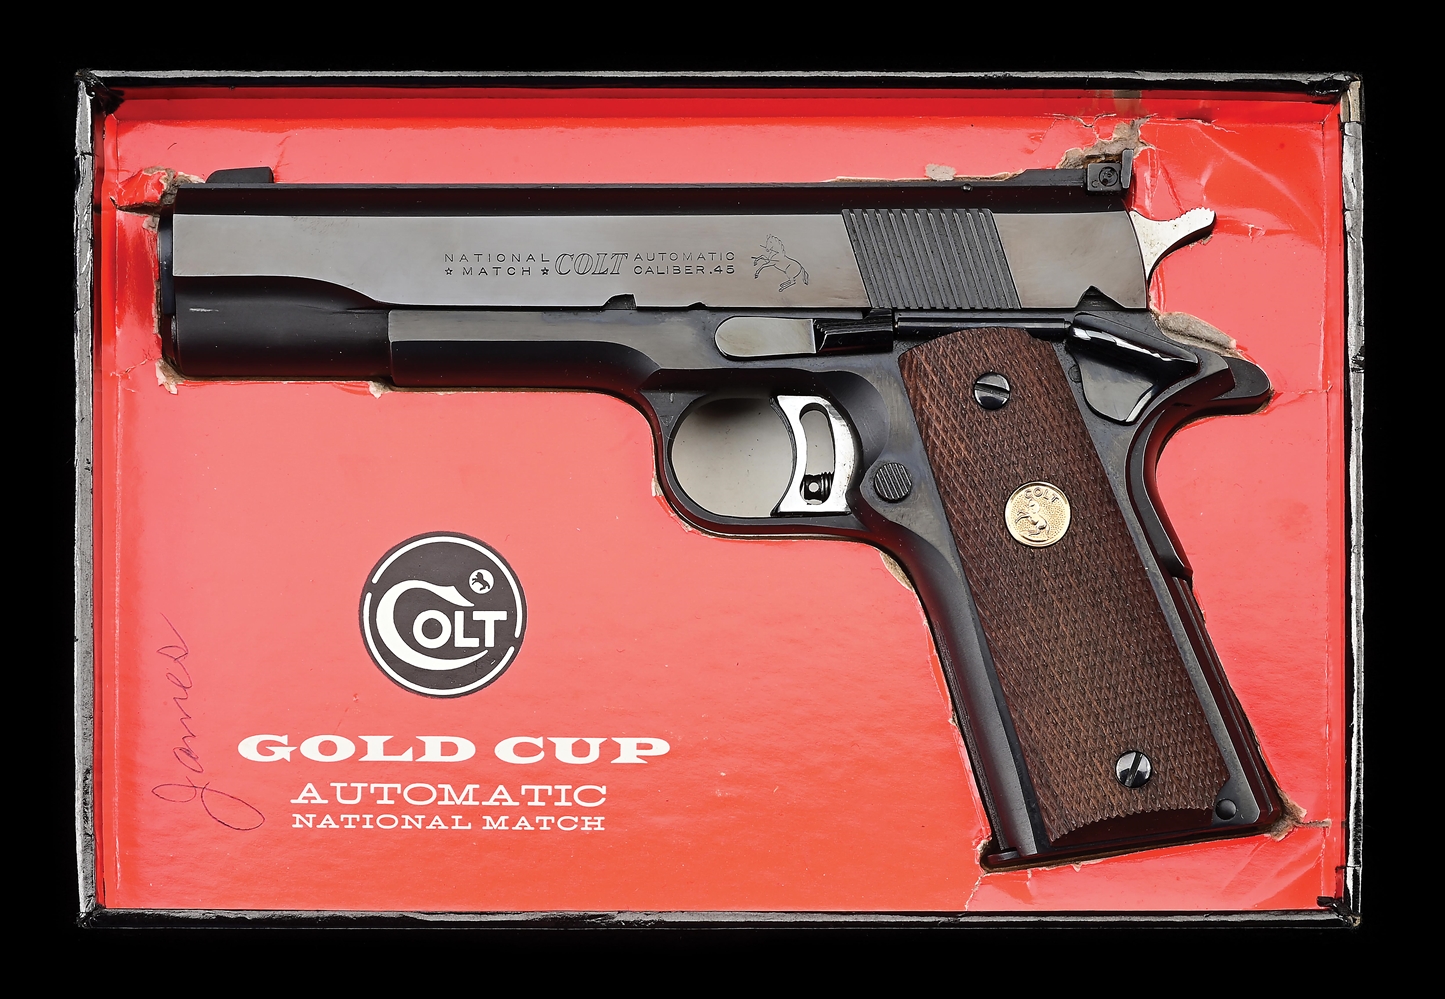 (C) EXCELLENT COLT GOLD CUP NATIONAL MATCH 1911 SEMI AUTOMATIC PISTOL WITH BOX.